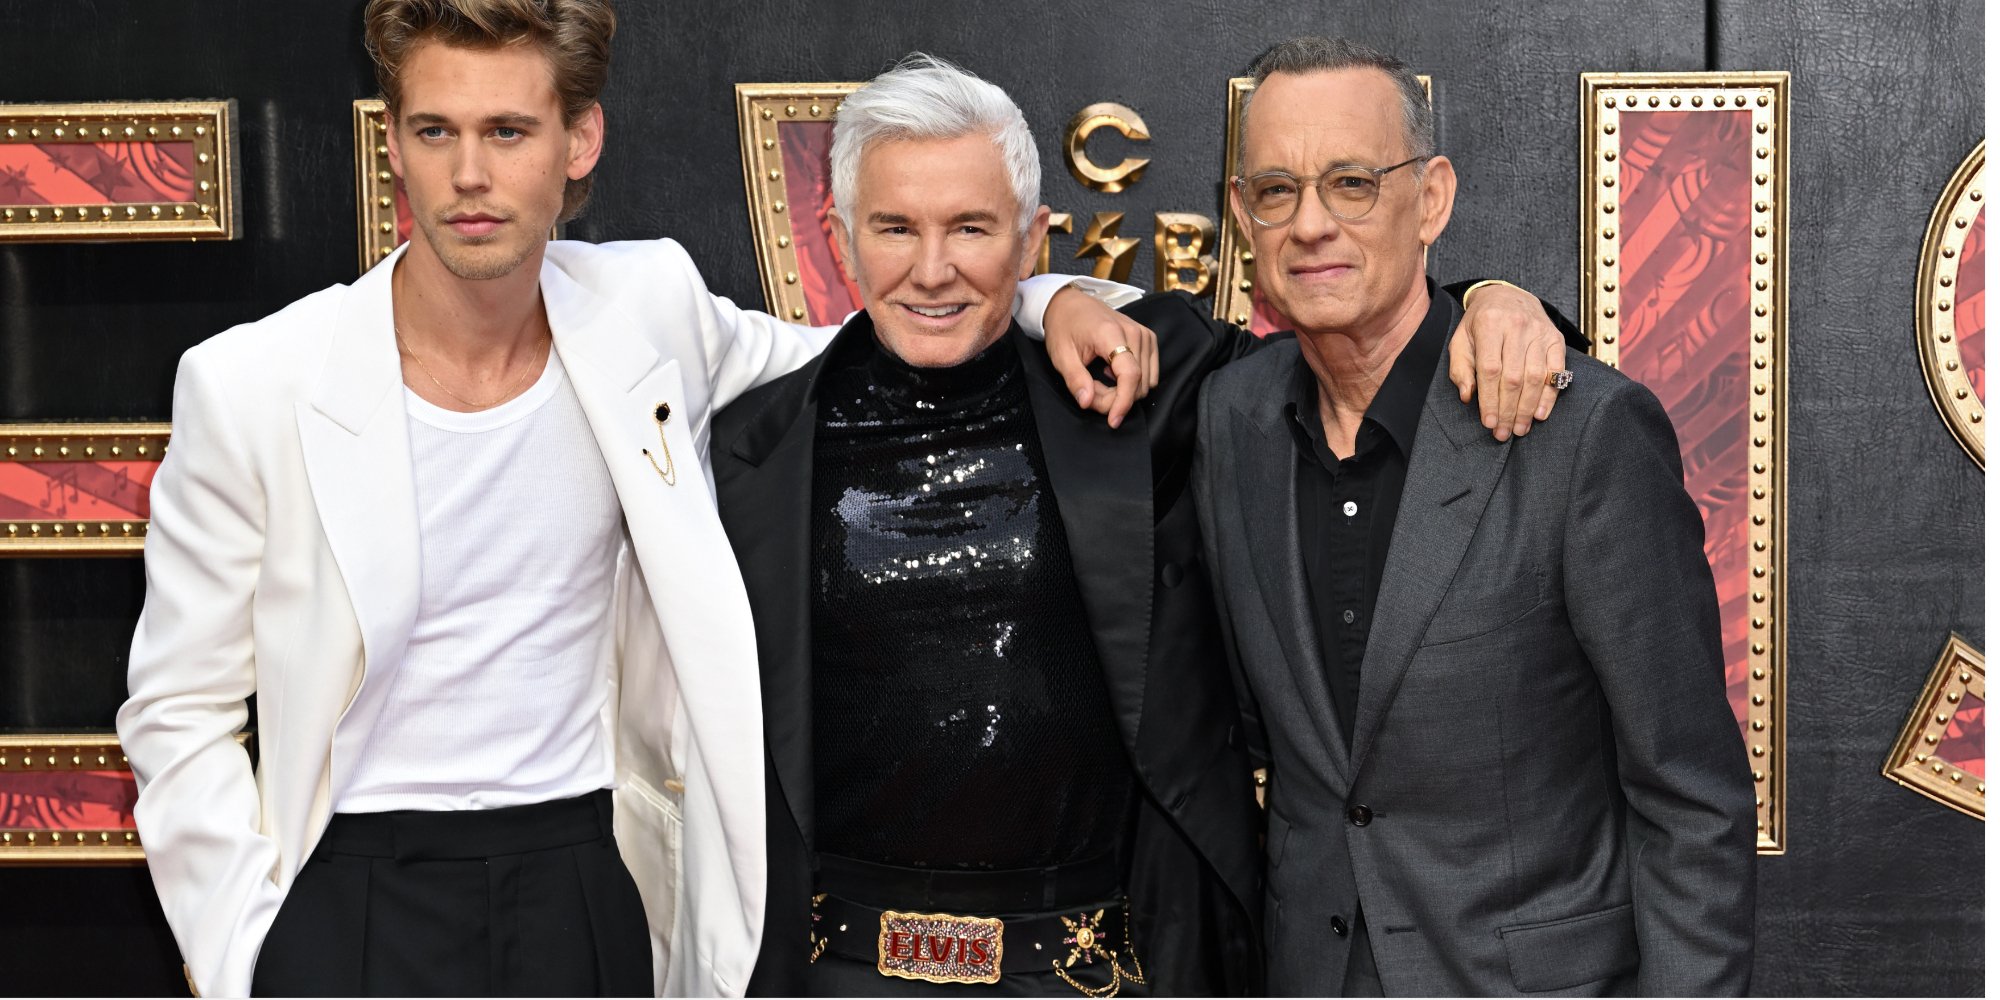 Austin Butler, Baz Luhrmann, and Tom Hanks walk the red carpet at a premiere for the film 'Elvis' where Luhrmann wanted to show the singer's 'humanity.'